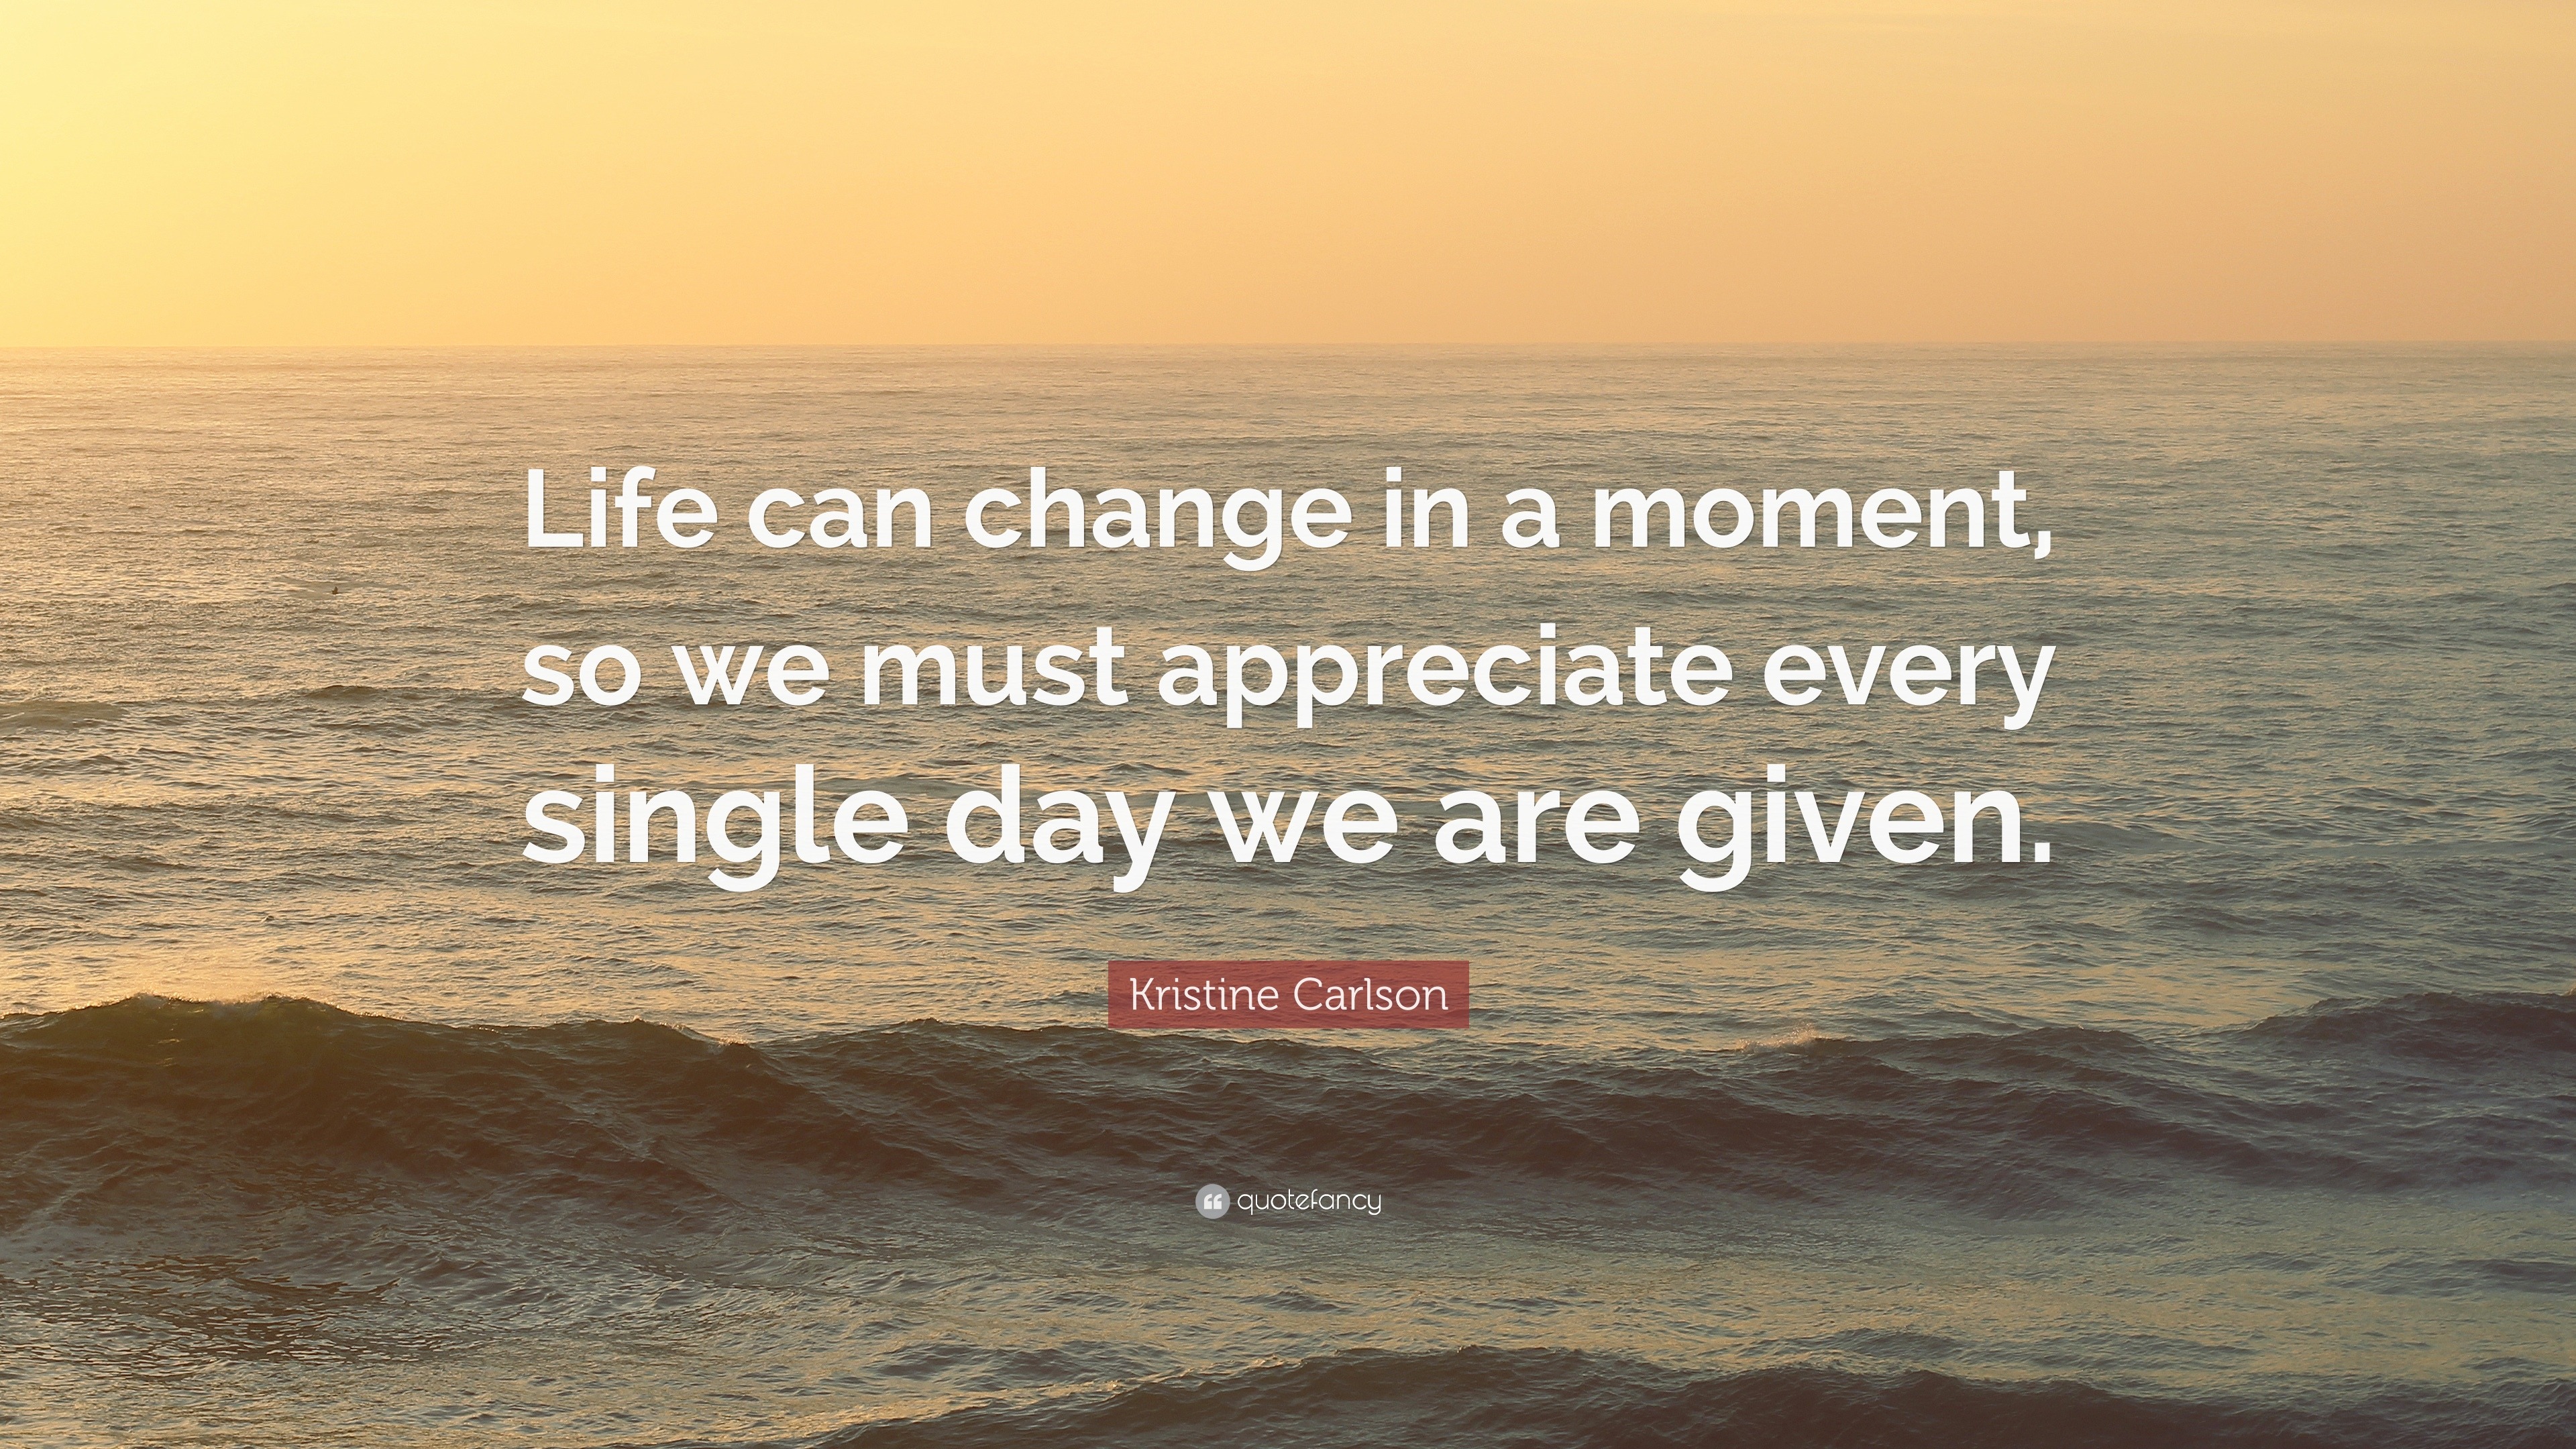 Kristine Carlson Quote: “Life can change in a moment, so we must